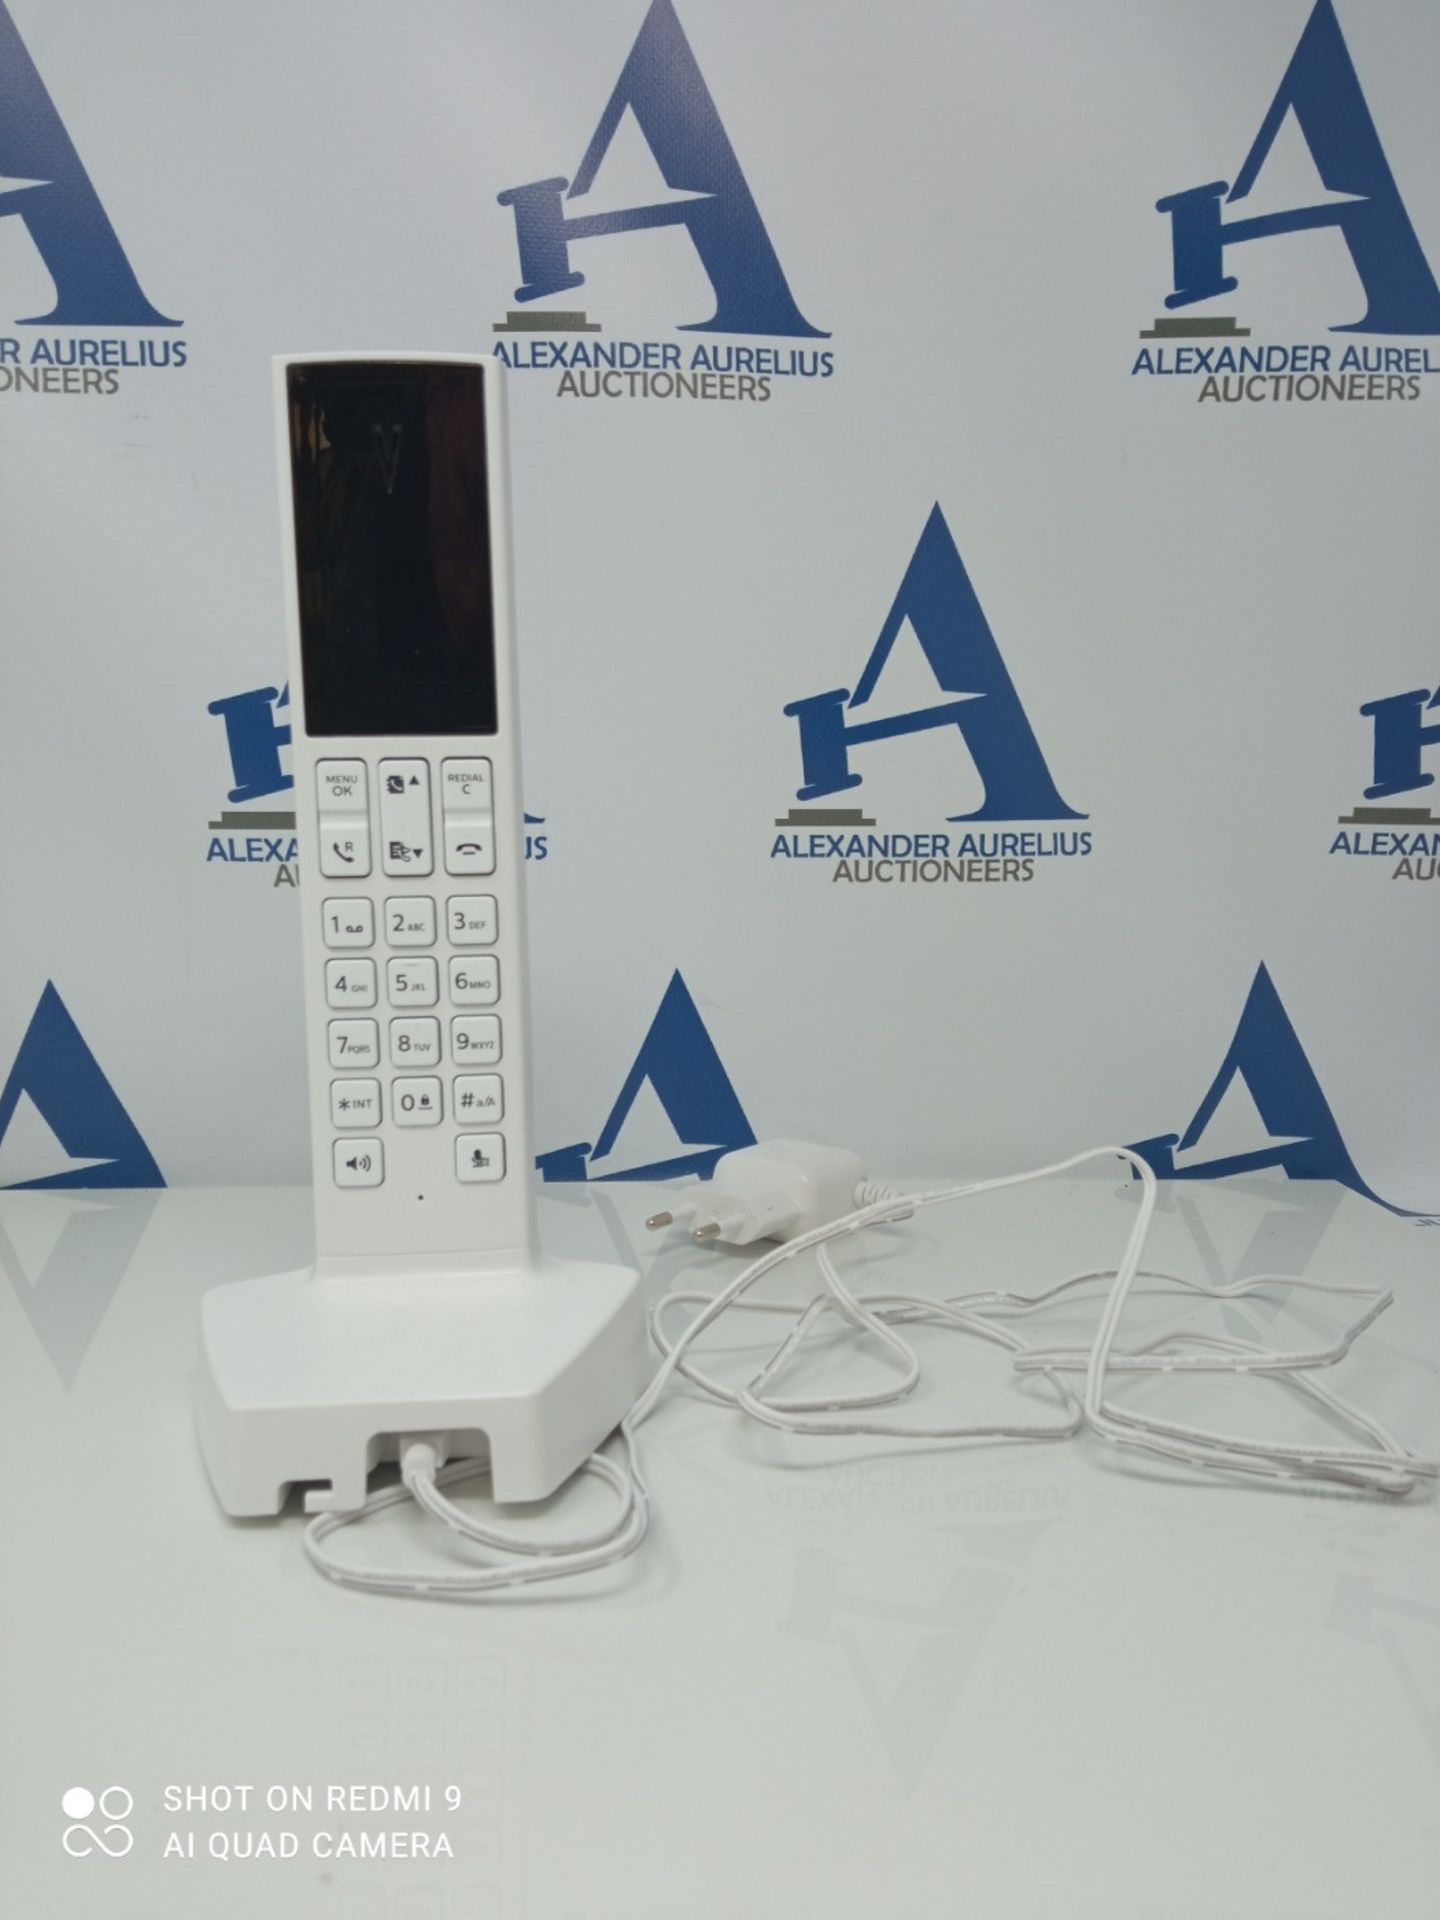 Philips M3501W/22 - Linea V DECT Design Cordless Phone - 1.8 Inch Display and HQ Sound - Image 2 of 2